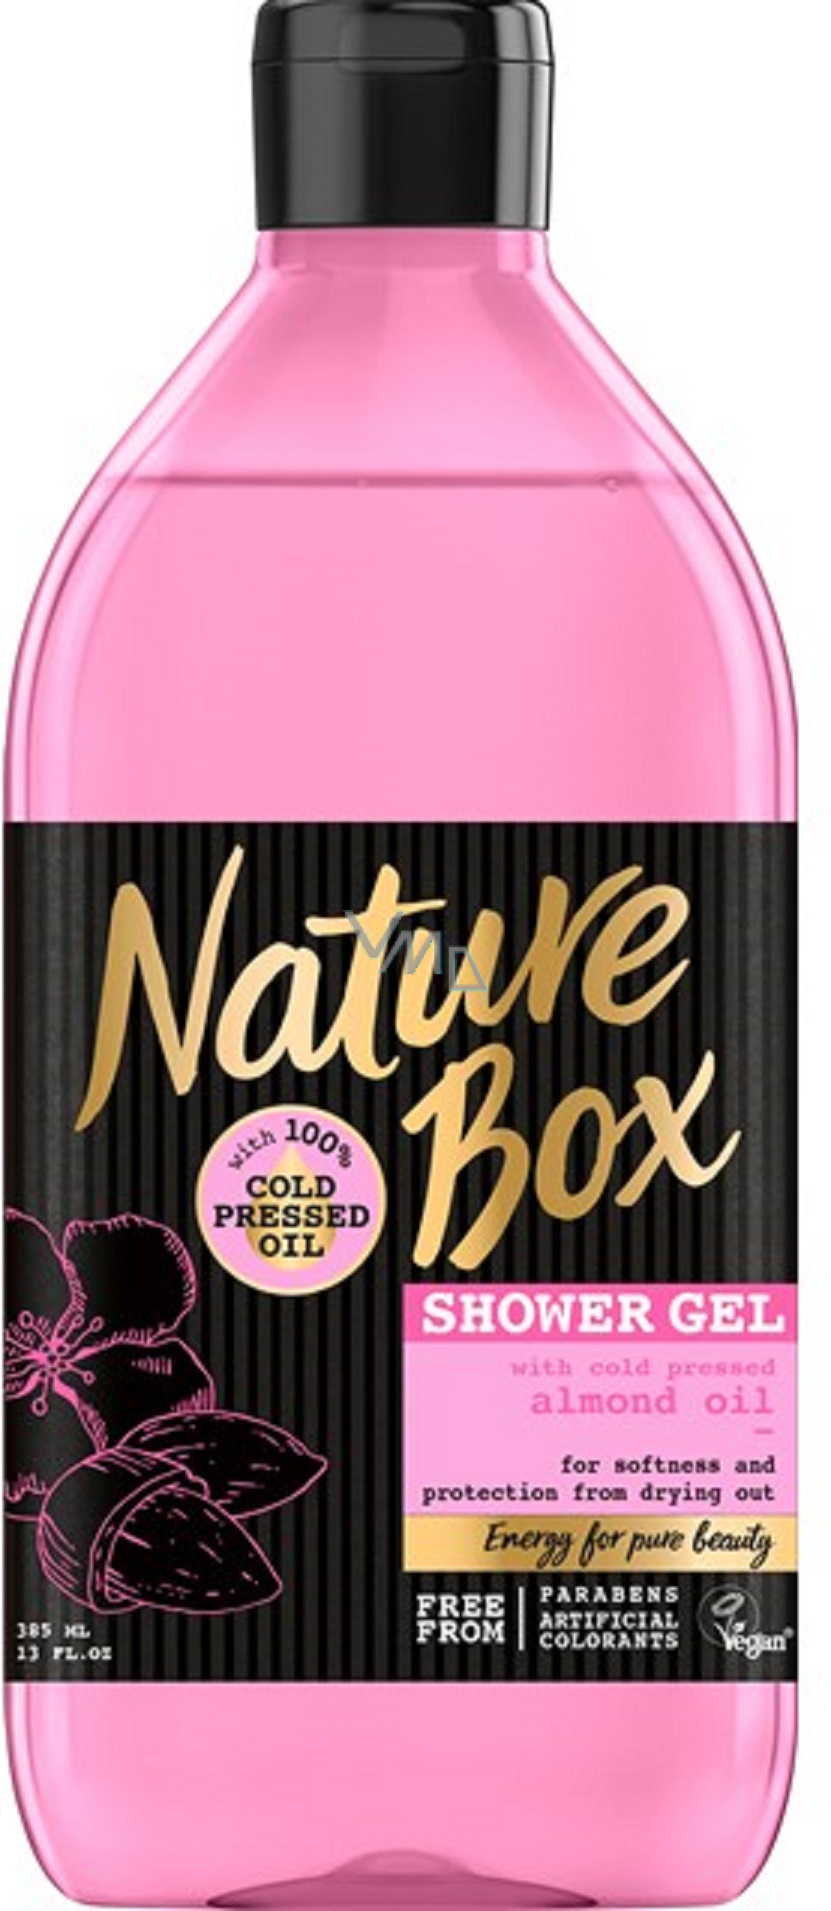 Nature Box Almonds antioxidant shower gel with 100% cold pressed almond oil, suitable for vegans 385 ml - VMD parfumerie - drogerie